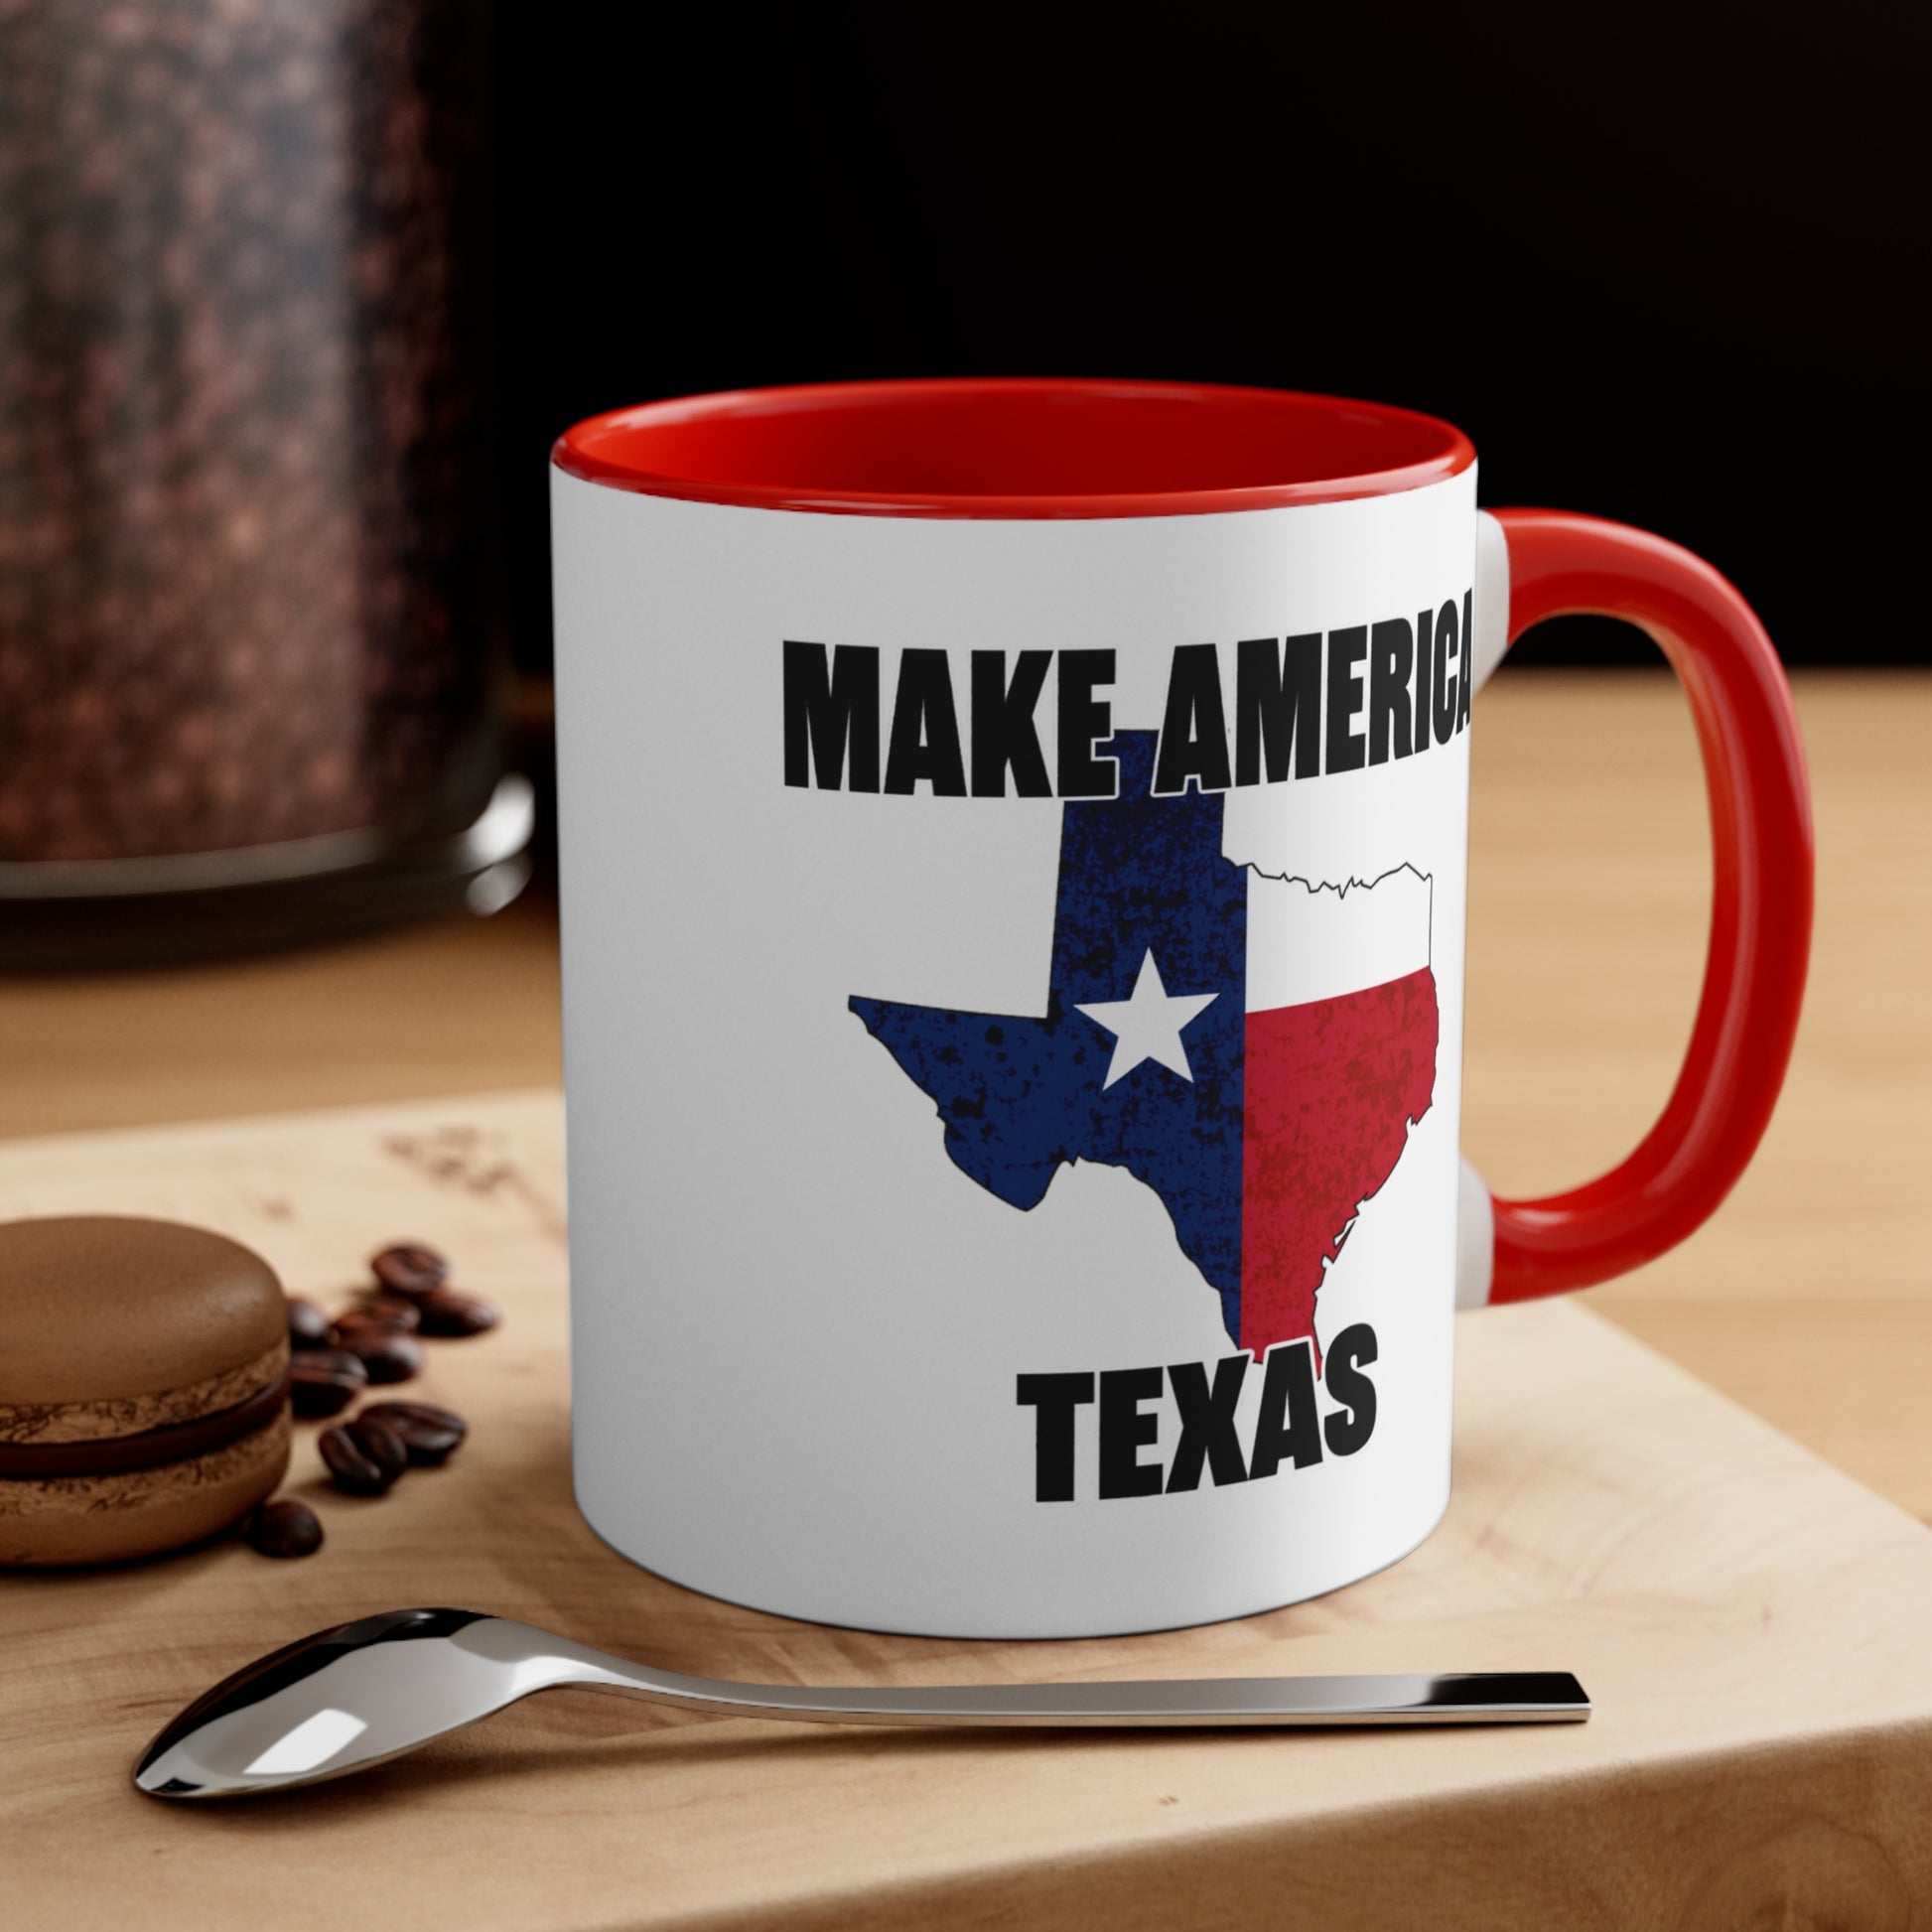 Make America Texas Mug, Funny Conservative Gift, Patriotic State Pride Coffee Cup, Unique Political Humor Tea Mug, Red Blue Star Design - News For Reasonable People